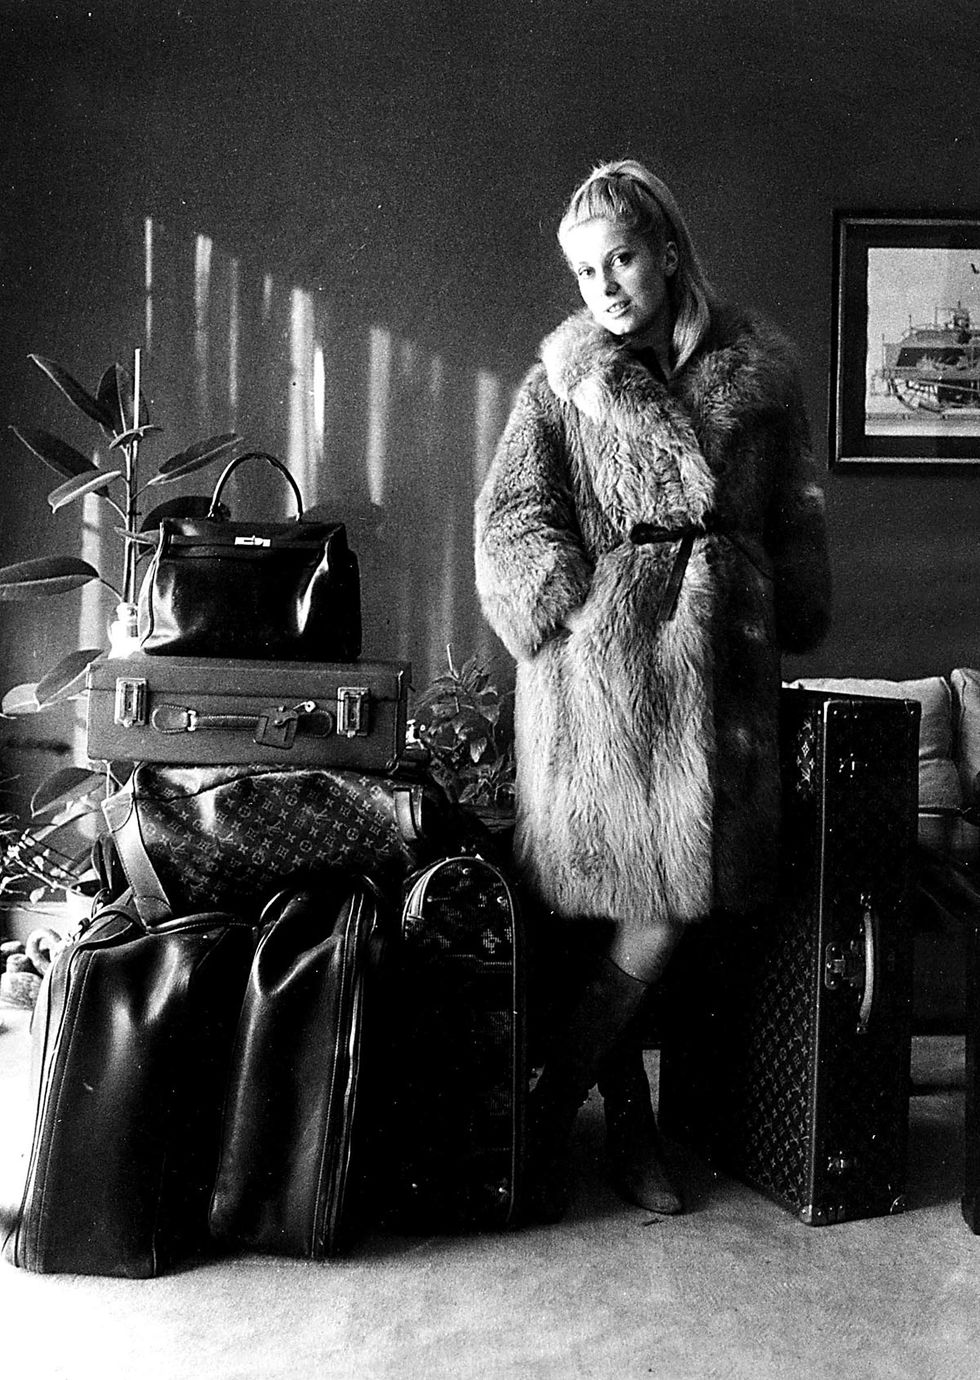 Photograph, Fur, Fur clothing, Black-and-white, Snapshot, Retro style, Photography, Vintage clothing, Room, Textile, 